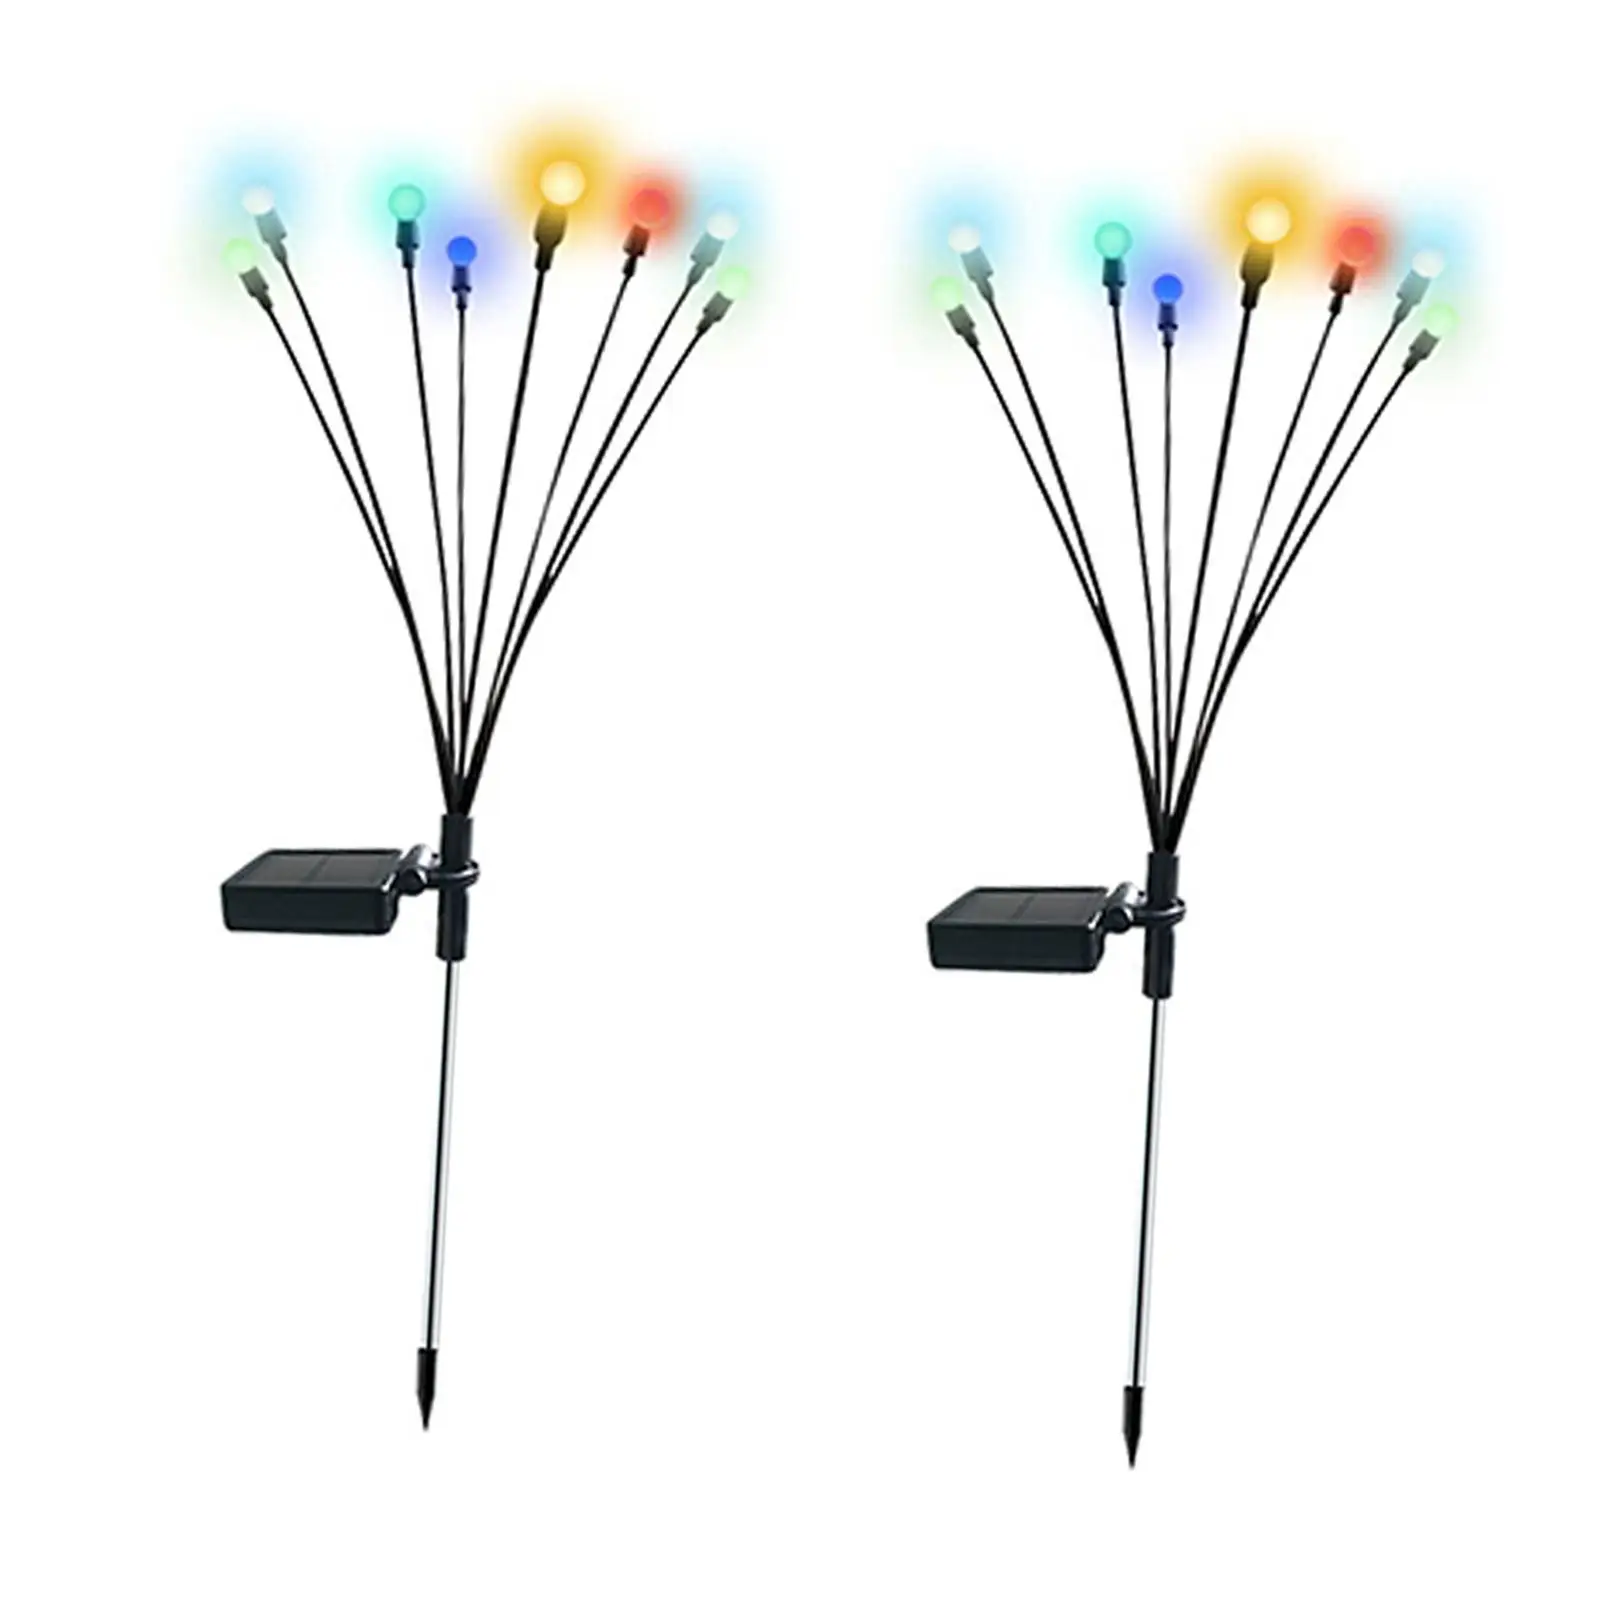 LED Solar Light IP65 Waterproof Multi Colour Decorative Swaying Light Lamp Stake for Outdoor Pathway Garden Decoration